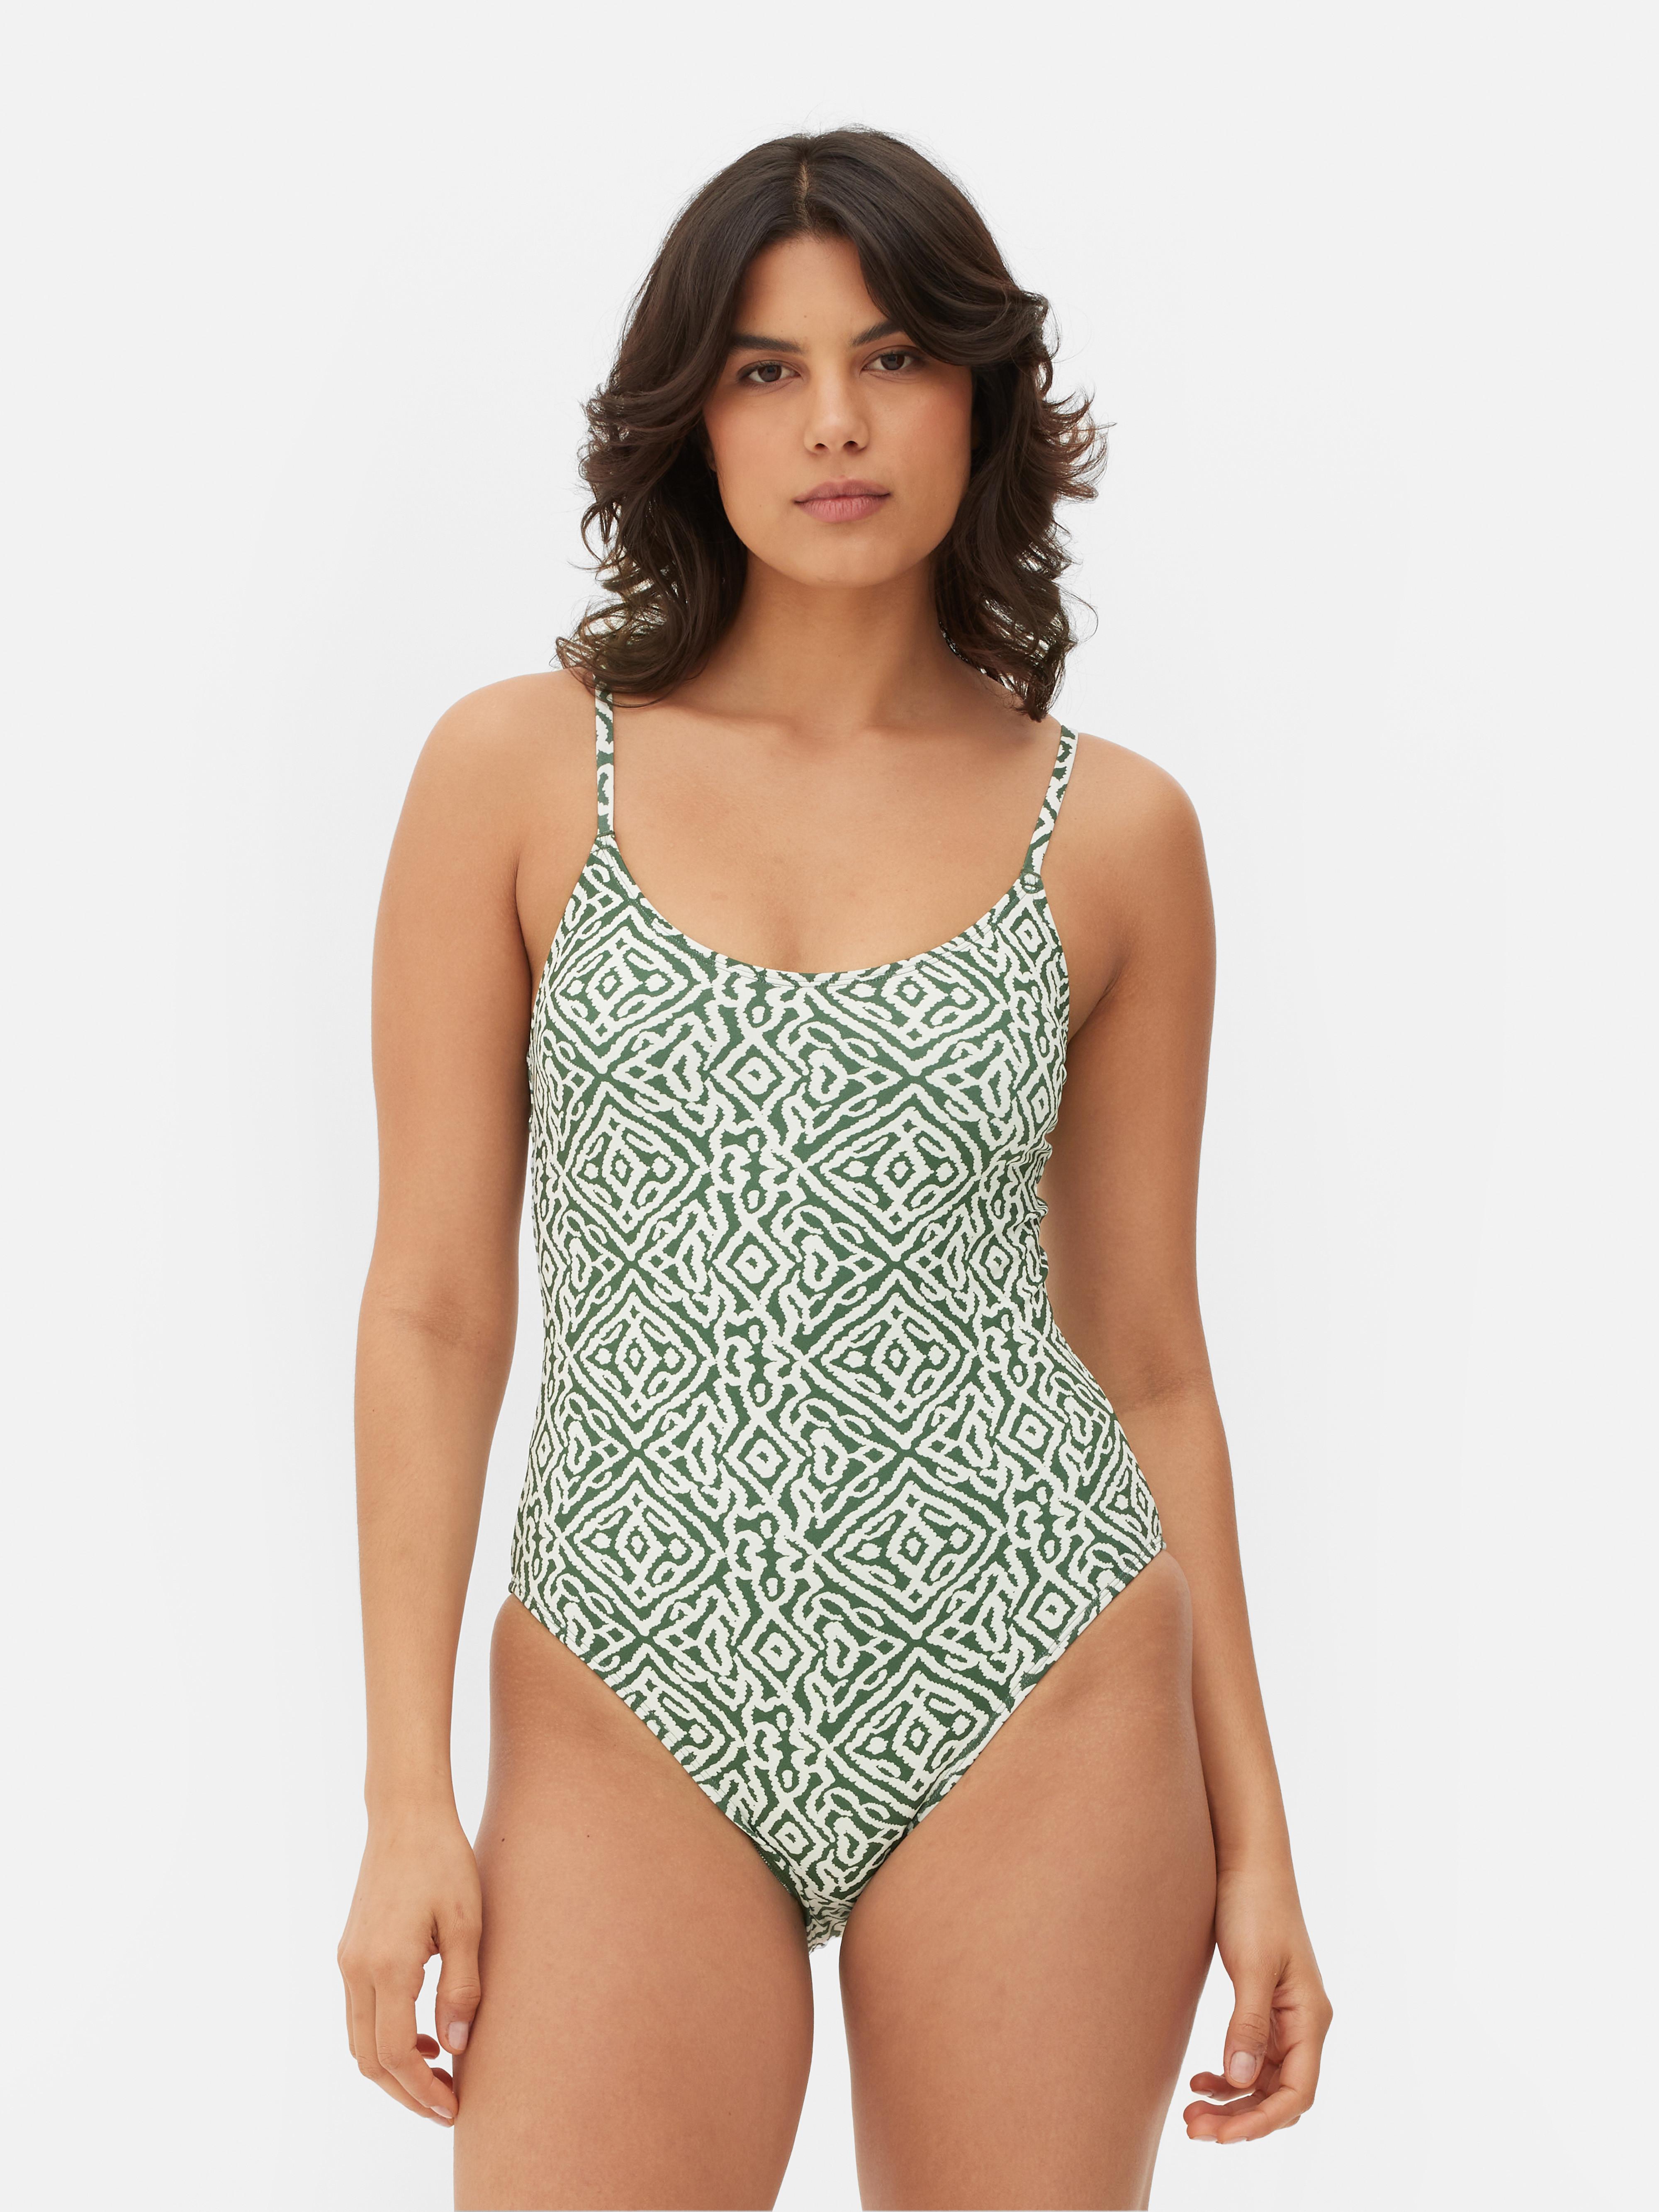 All-Over Print Swimsuit